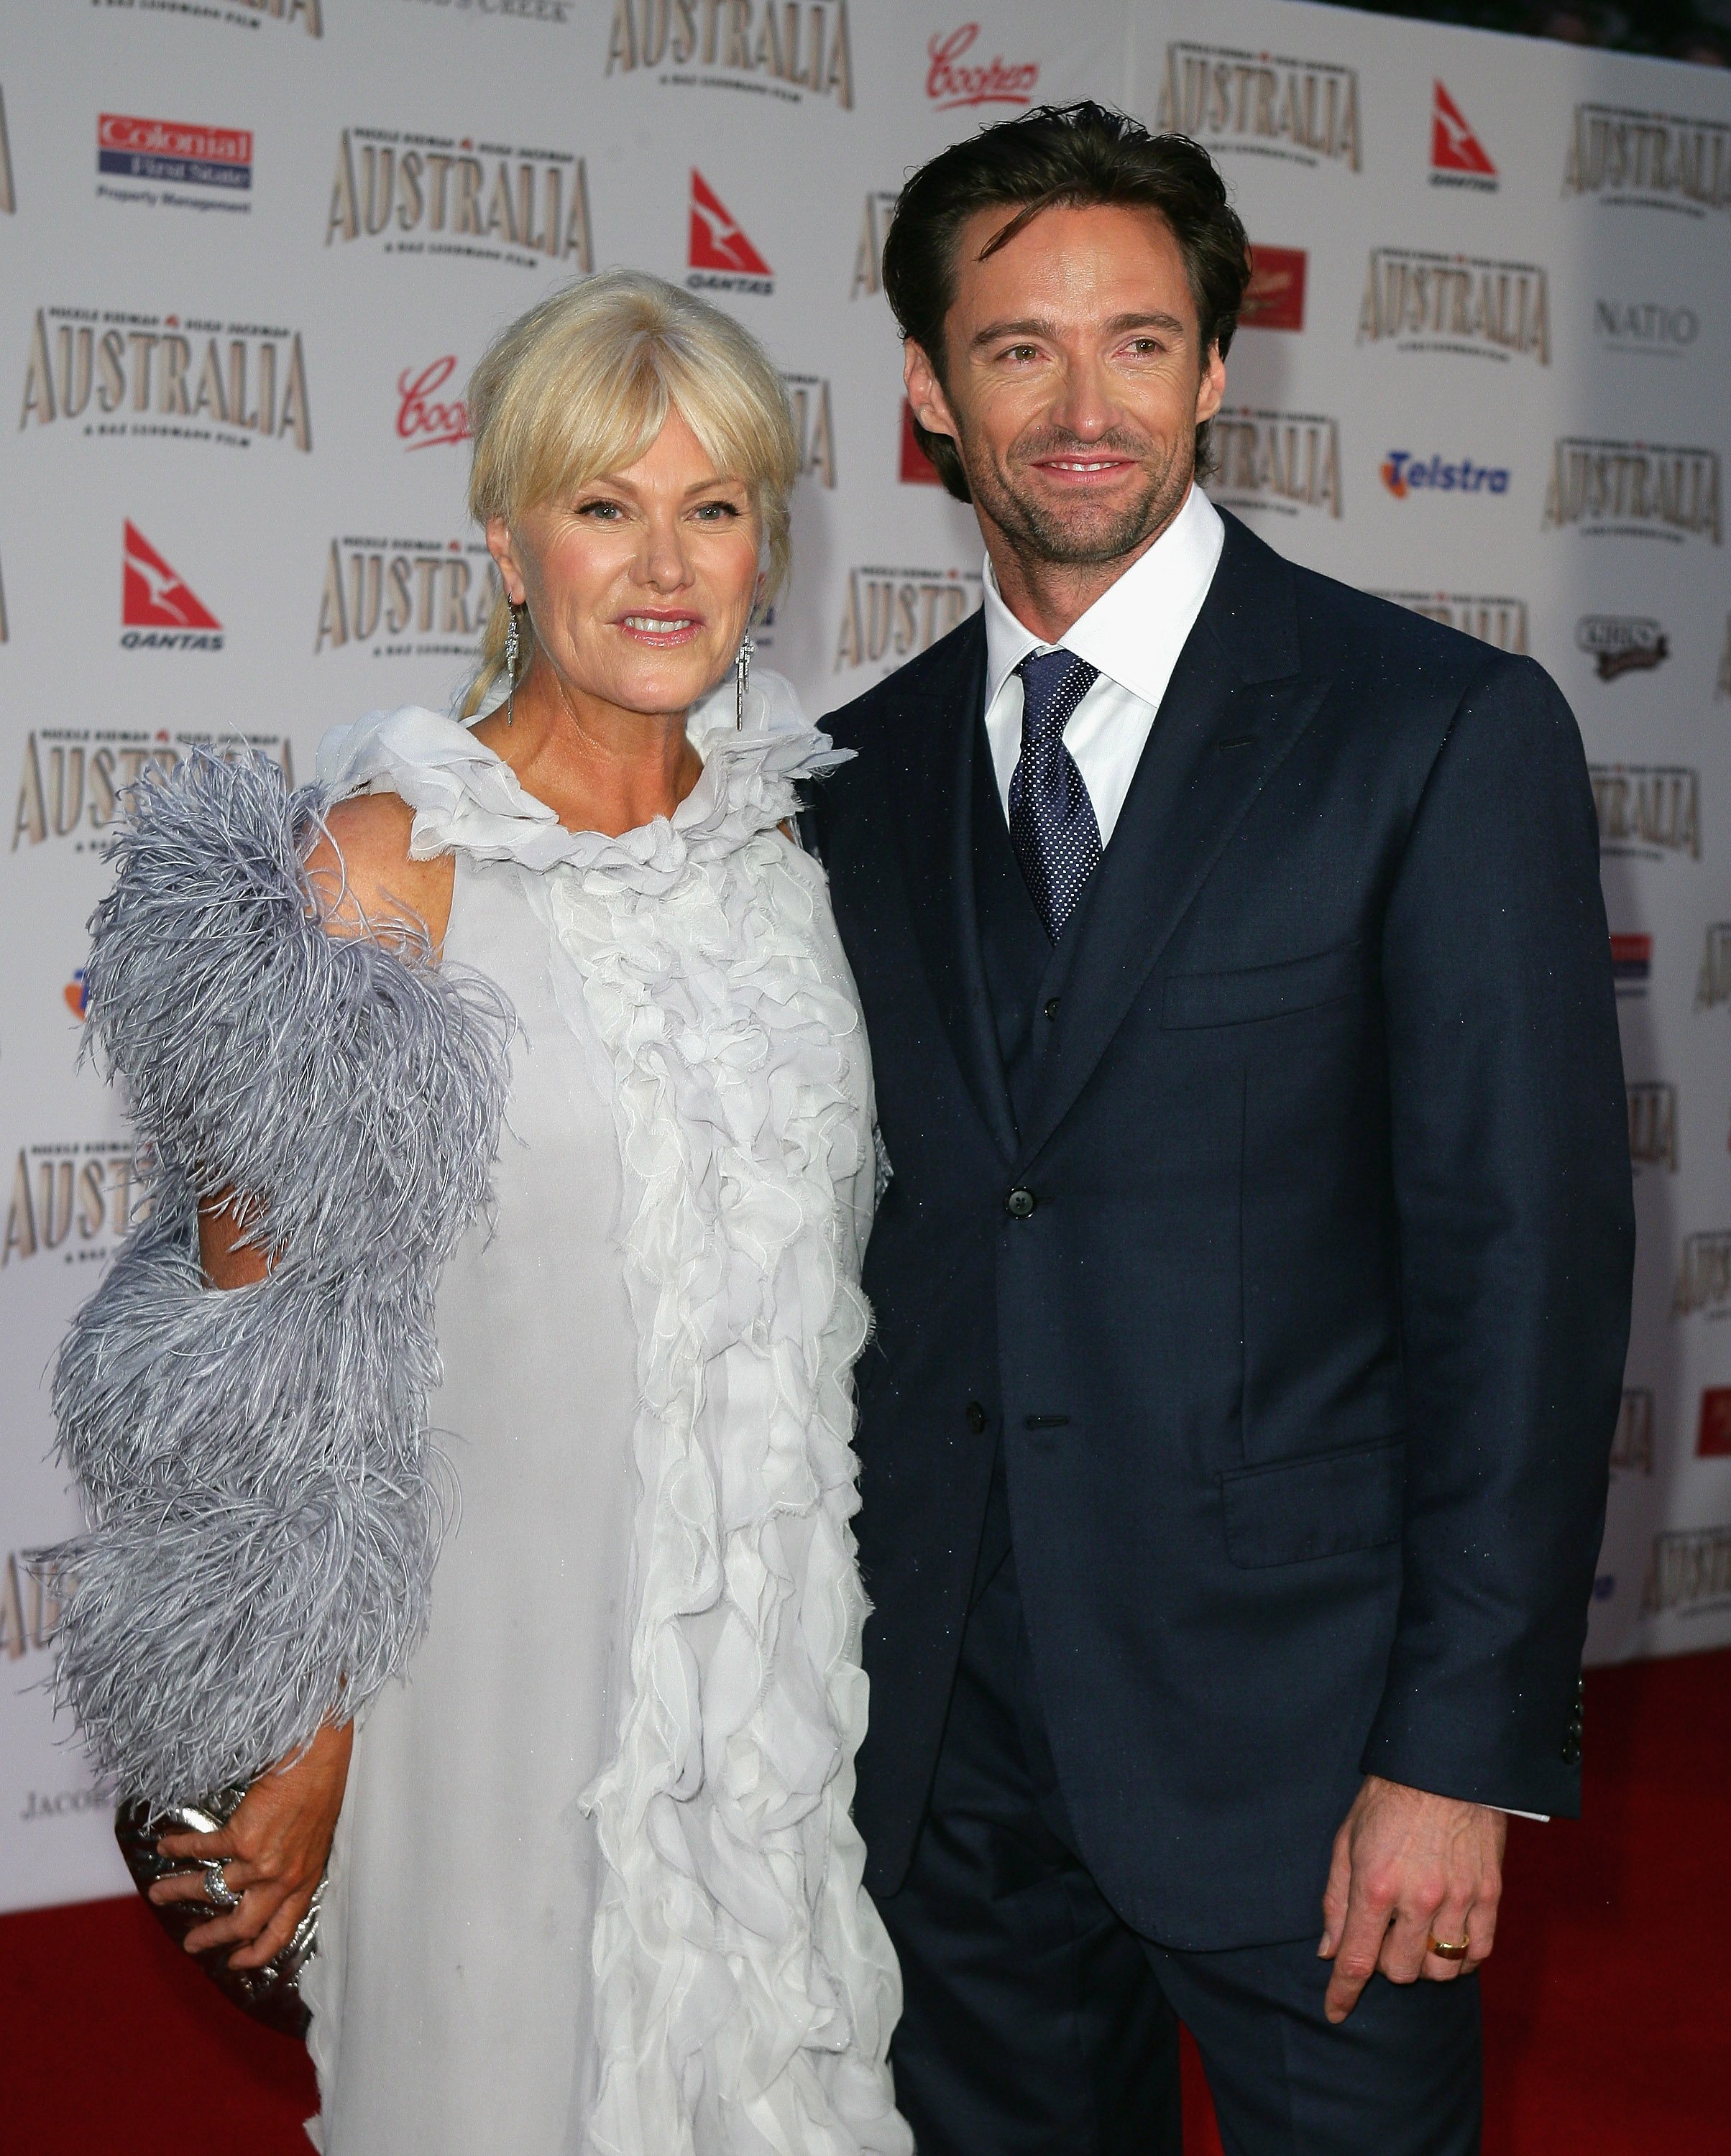 Actor Hugh Jackman and his wife Deborah-Lee Furness at the George Street Greater Union Cinemas on November 18, 2008 in Sydney, Australia. | Source: Getty Images